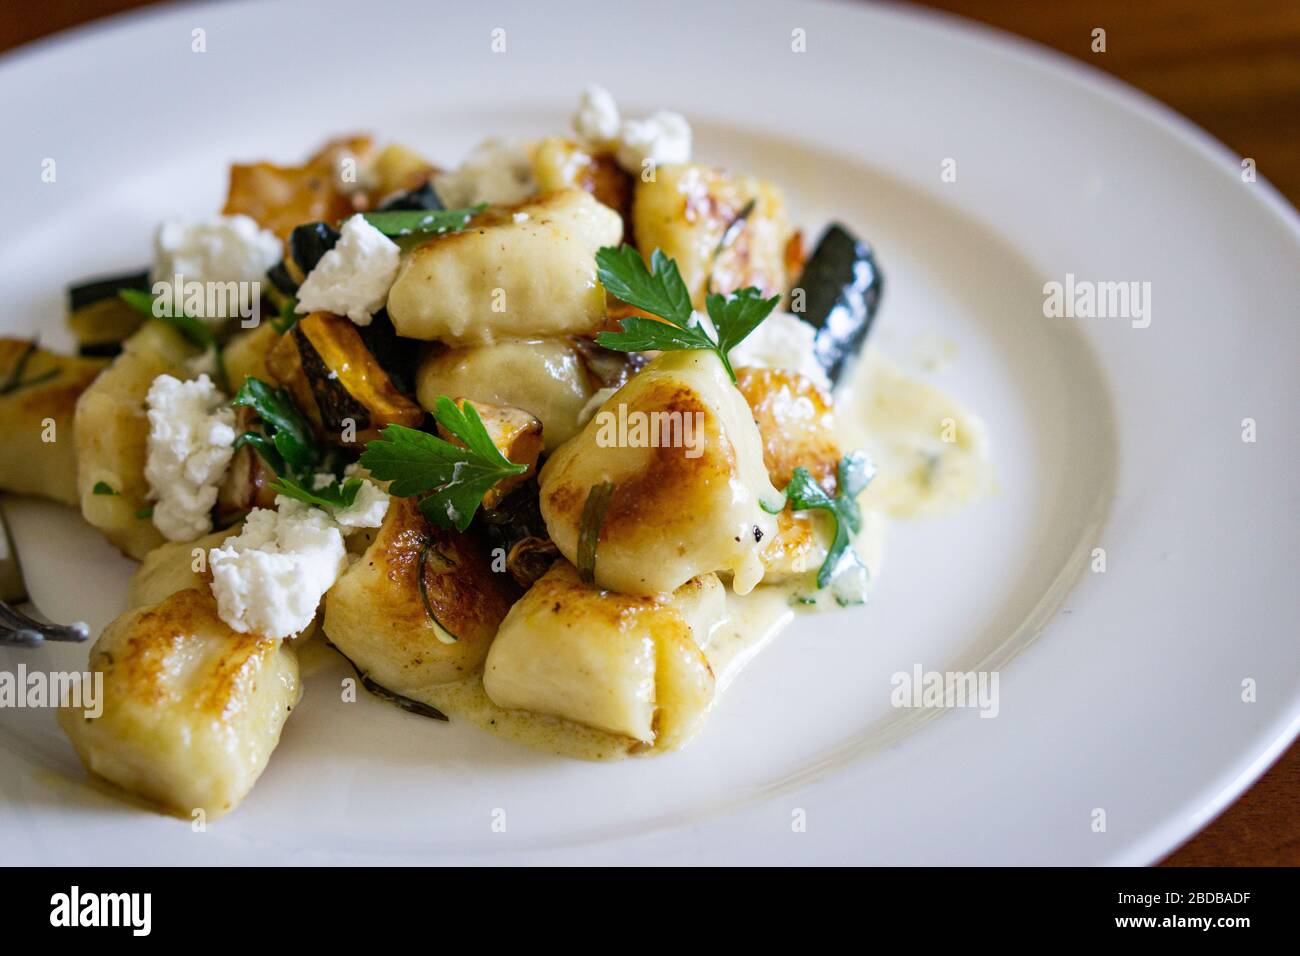 Home made gnocchi with goats cheese and parsley. Stock Photo